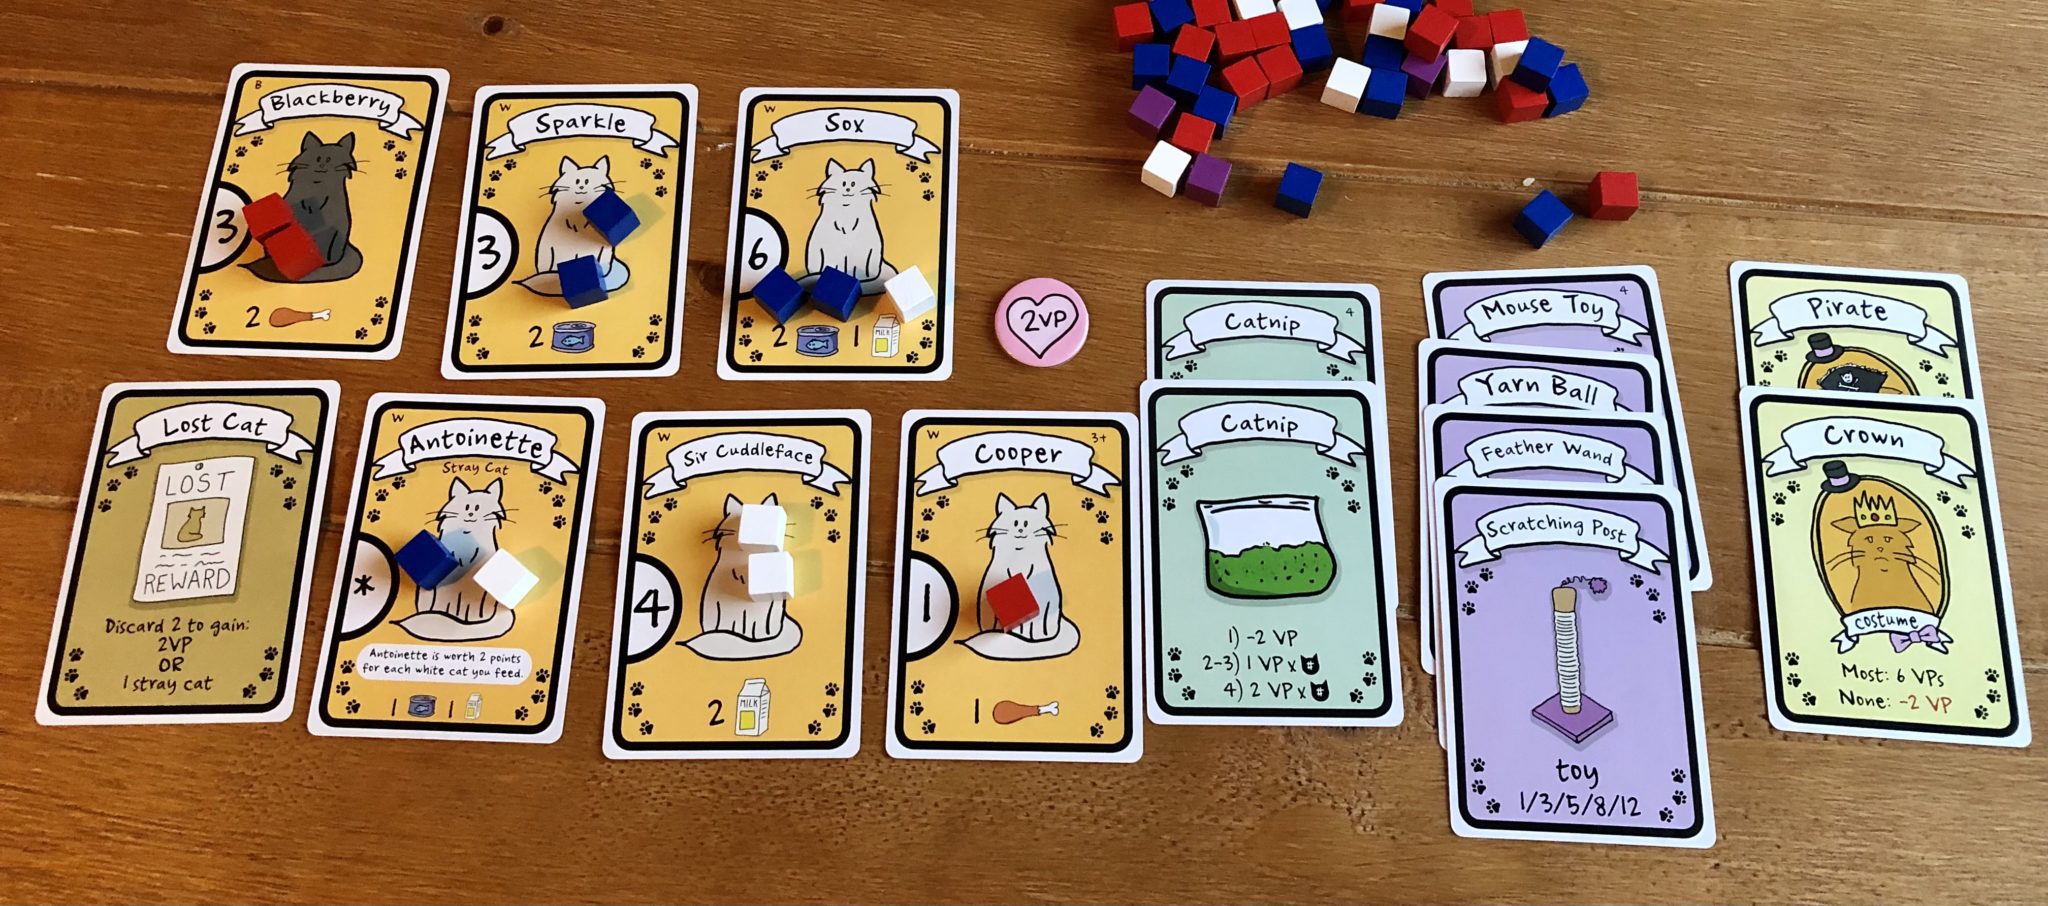 cat lady final cards to score points